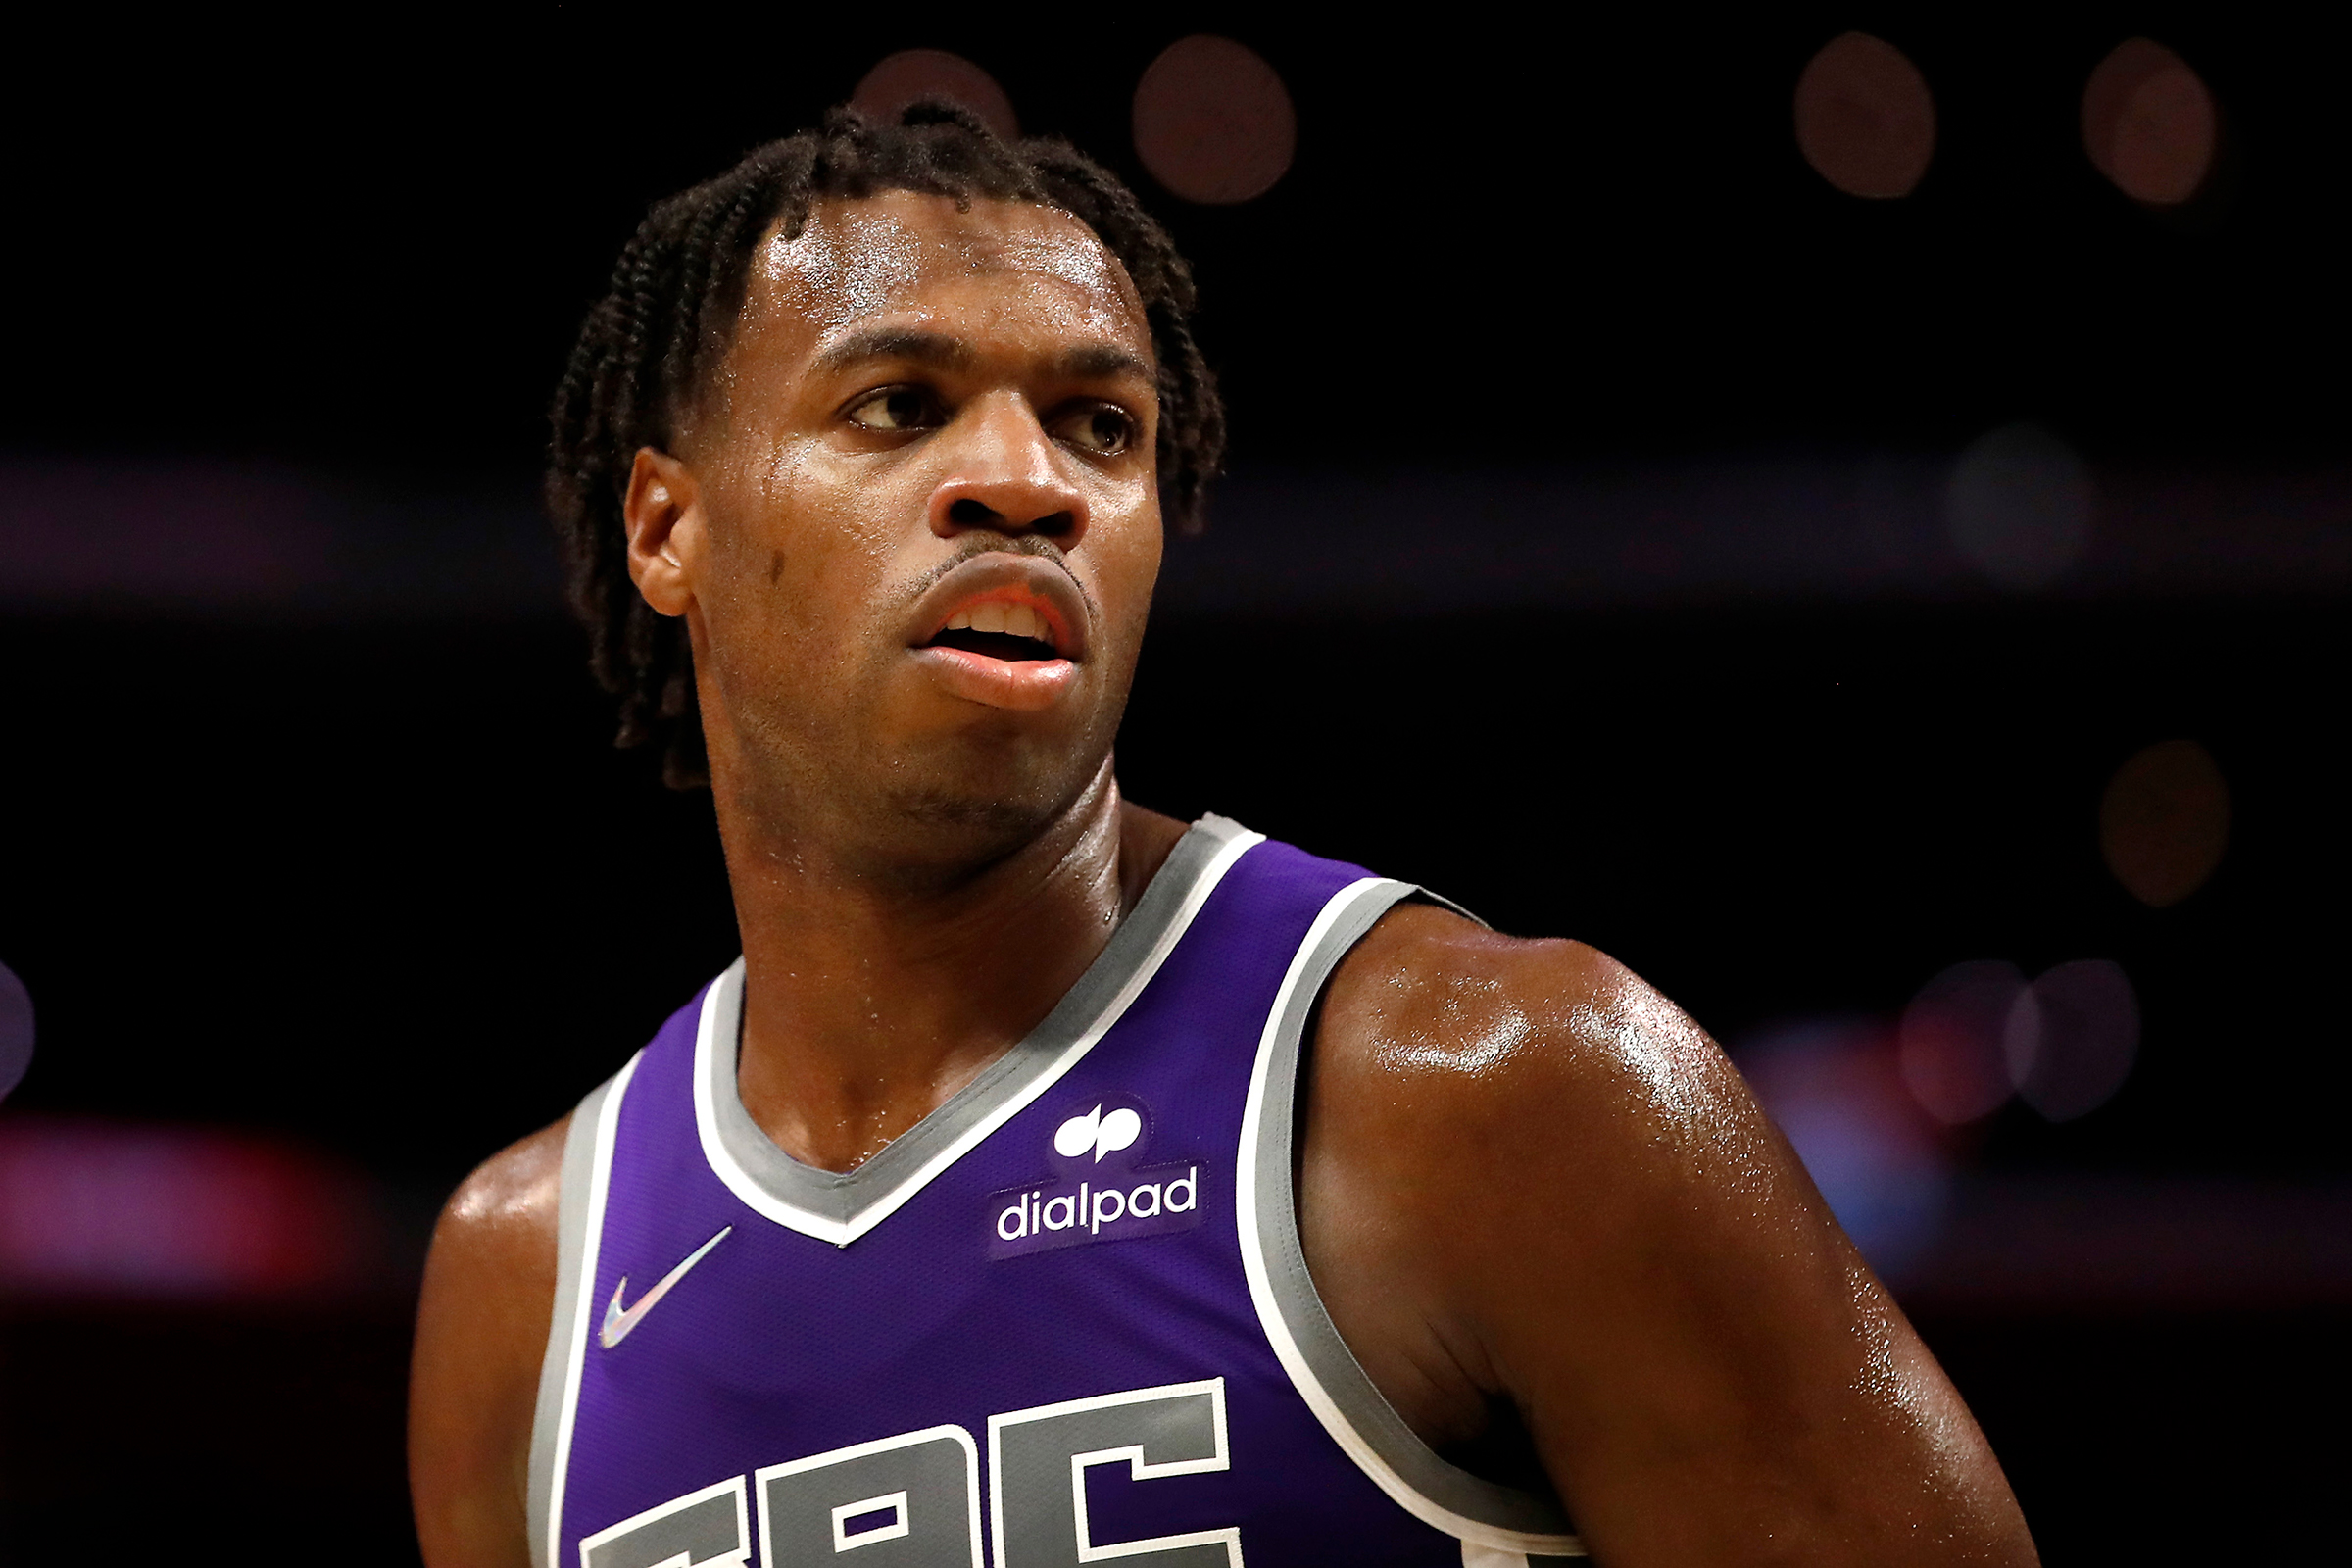  Buddy Hield #24 of the Sacramento Kings looks on during the first quarter of the preseason game against the Los Angeles Clippers at Staples Center on October 06, 2021 in Los Angeles, California. 